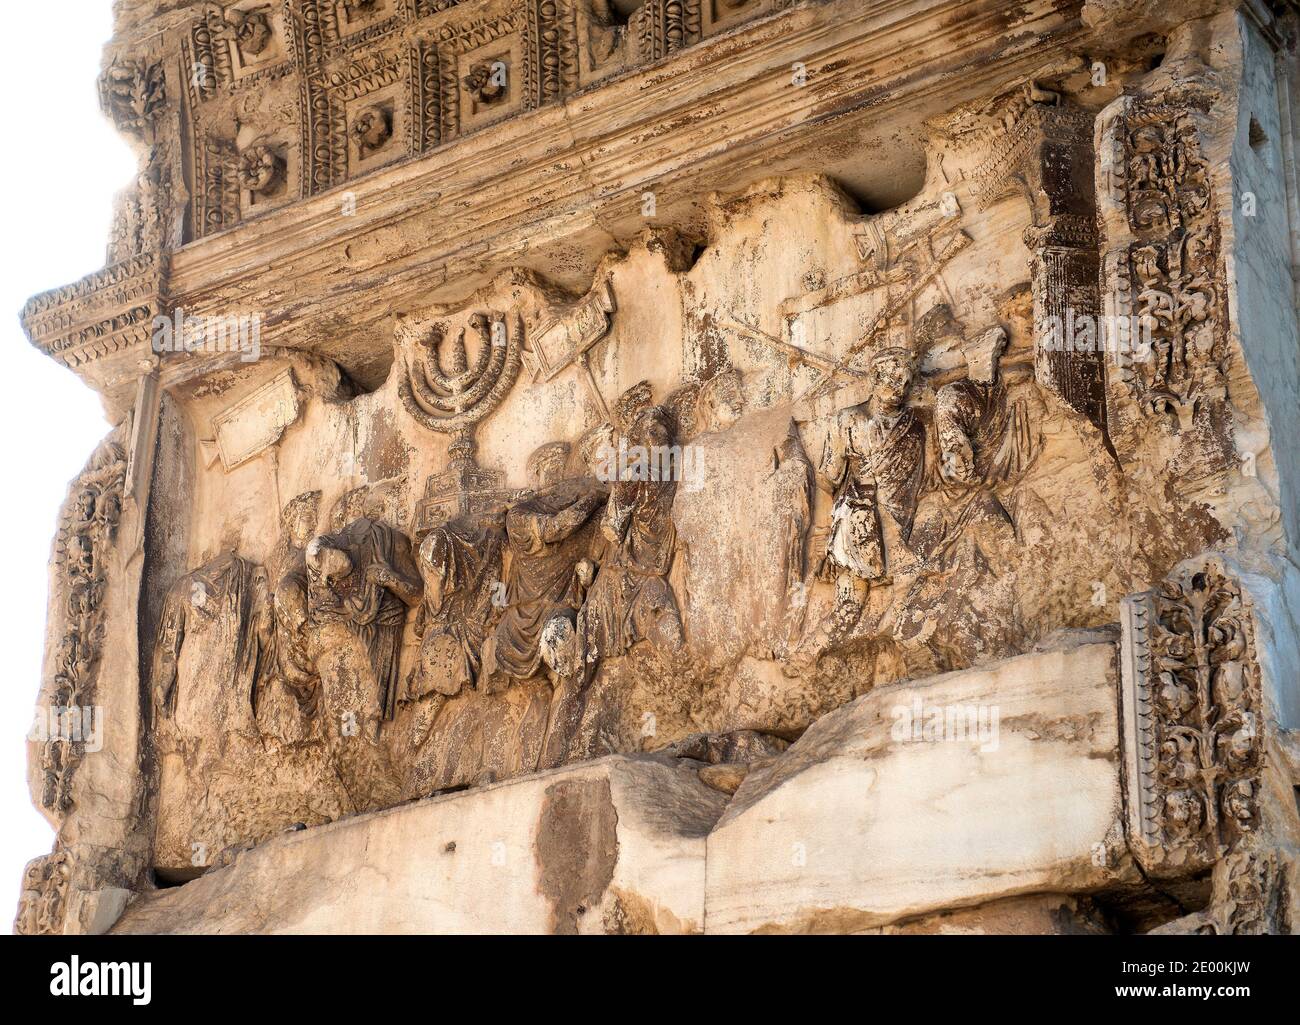 Detail of the fresco showing the Golden Menorah in the Arch of Titus, located on the Via Sacra, just to the south-east of the Roman Forum in Rome, Italy, which was built to commemorate Titus's victory in Judea, depicts a Roman victory procession with soldiers carrying spoils from the Temple, including the Menorah, which were used to fund the construction of the Colosseum, on Wednesday, October 23, 2013. It was constructed c. 82 AD by the Roman Emperor Domitian shortly after the death of his older brother Titus to commemorate Titus' victories, including the Siege of Jerusalem in 70 AD. The Arch Stock Photo